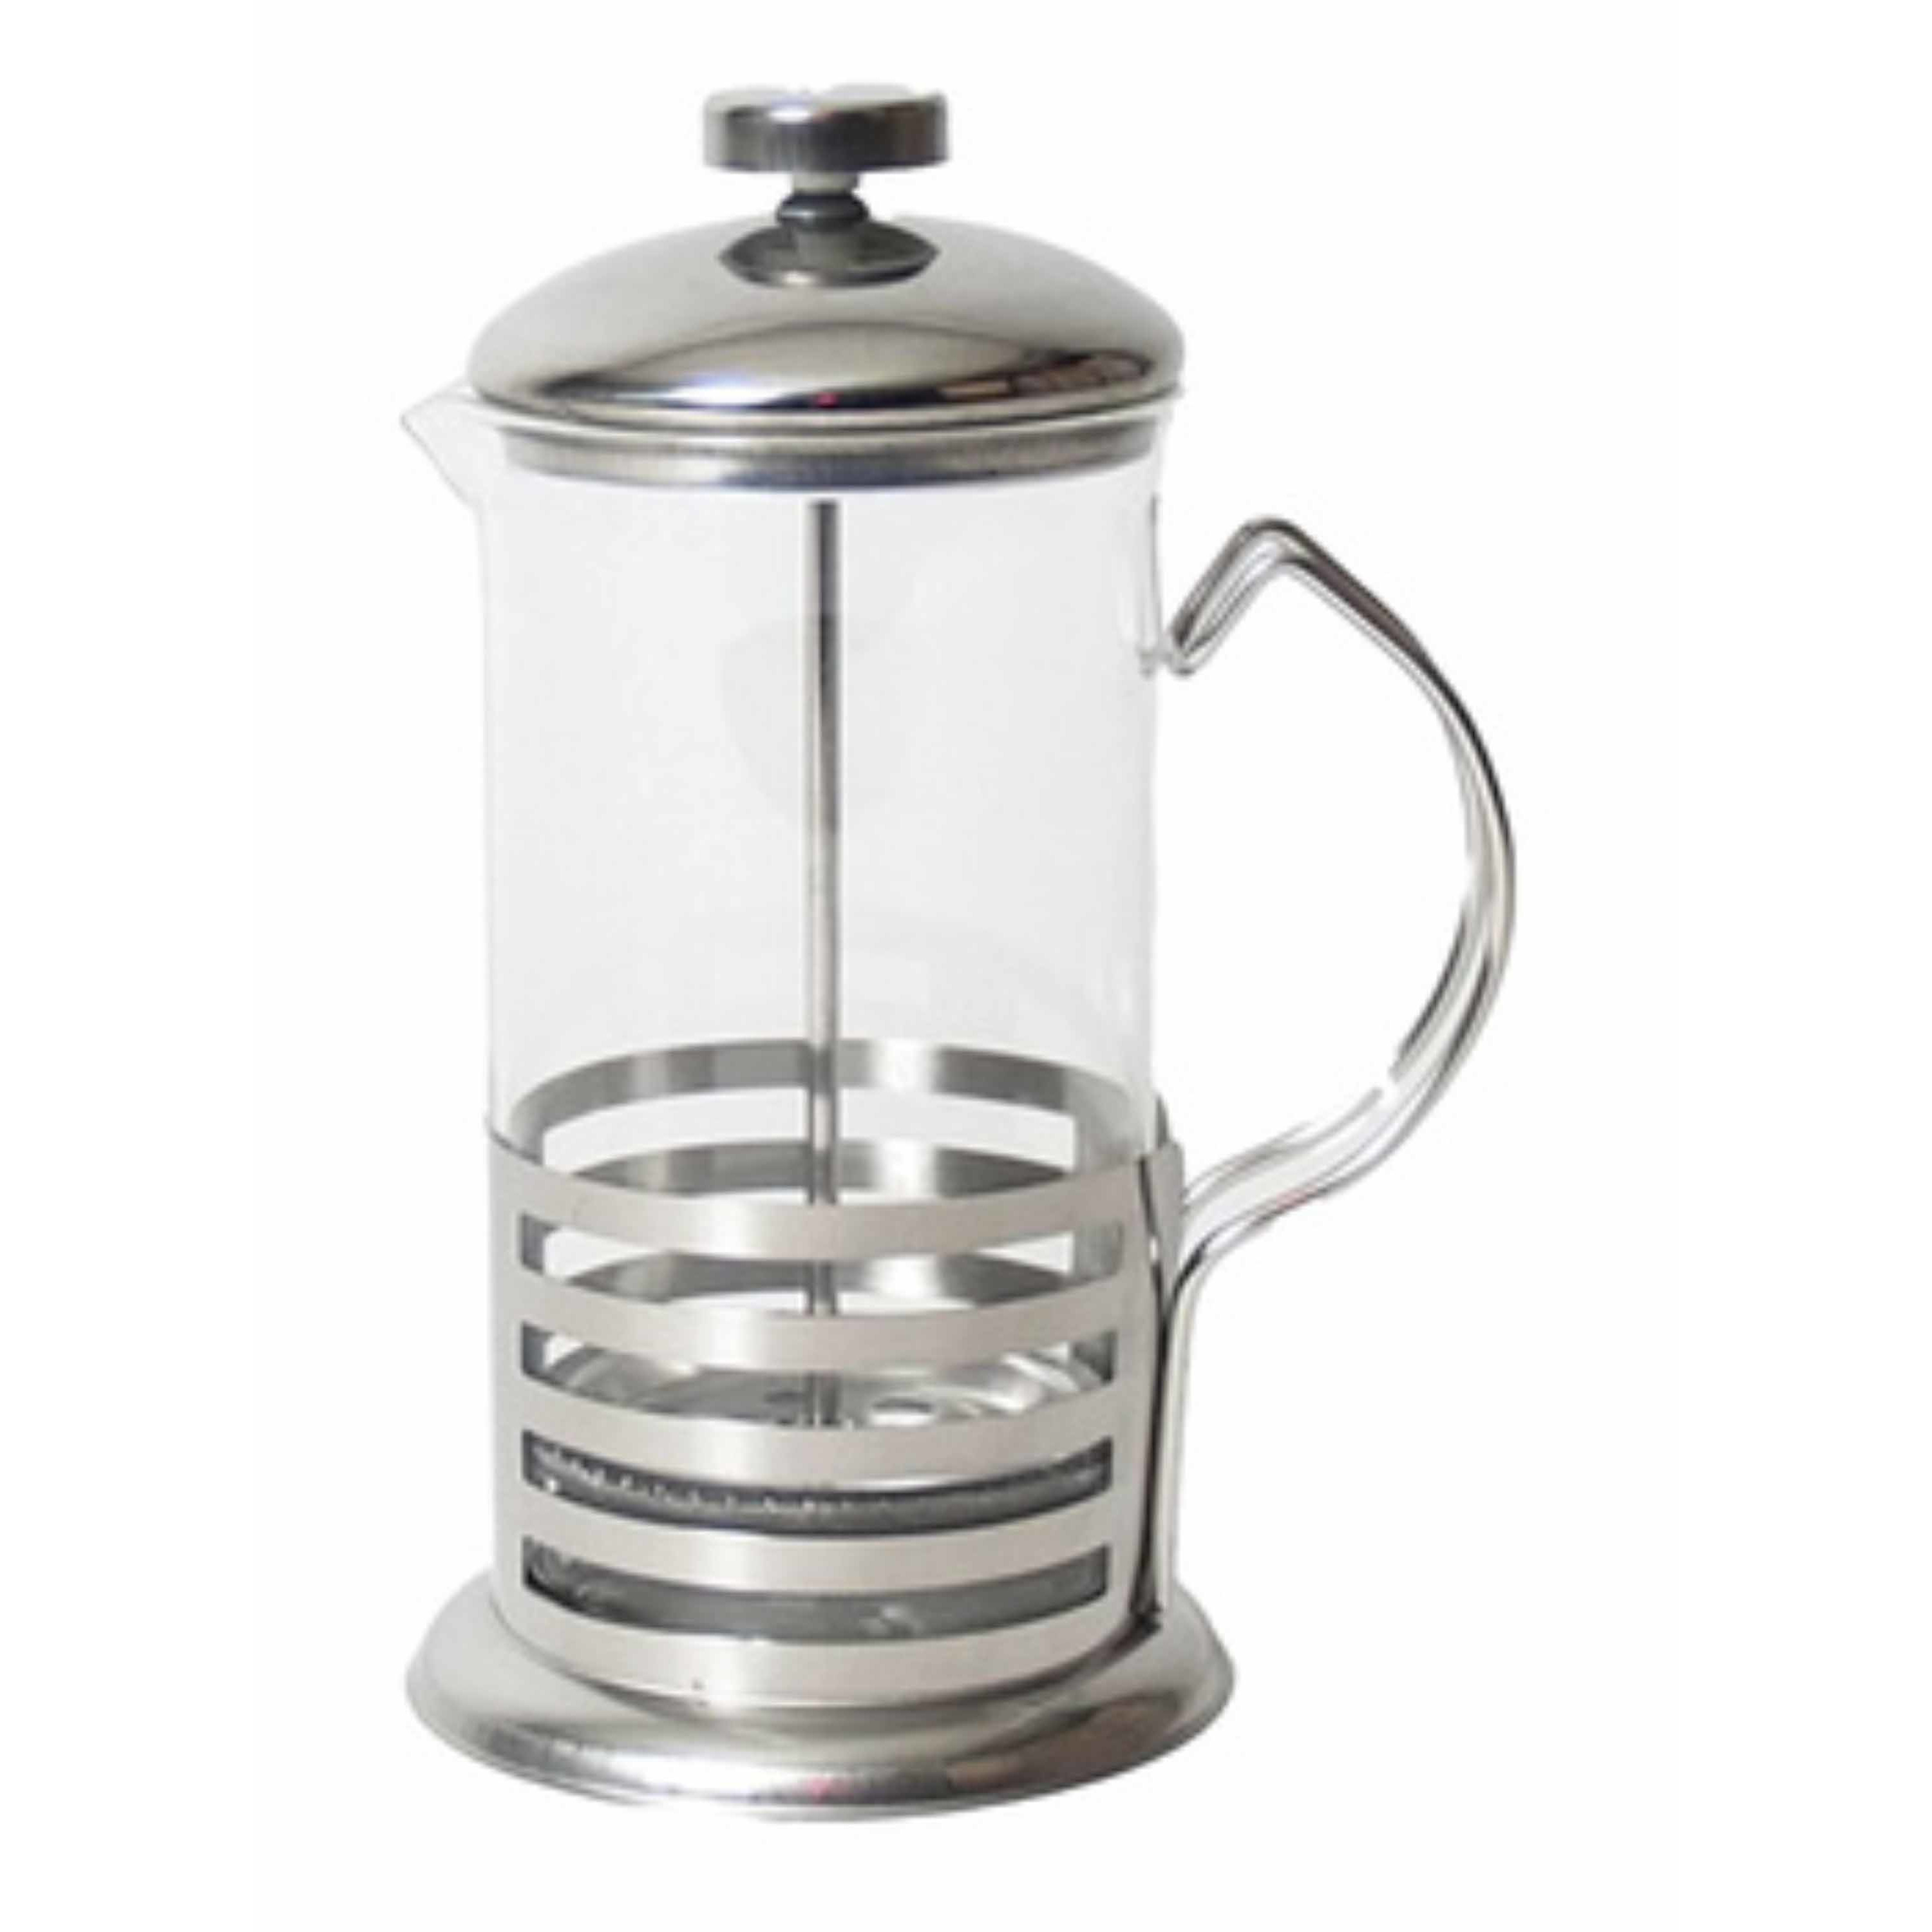 French press koffie-thee maker- cafetiere glas-RVS 800 ml